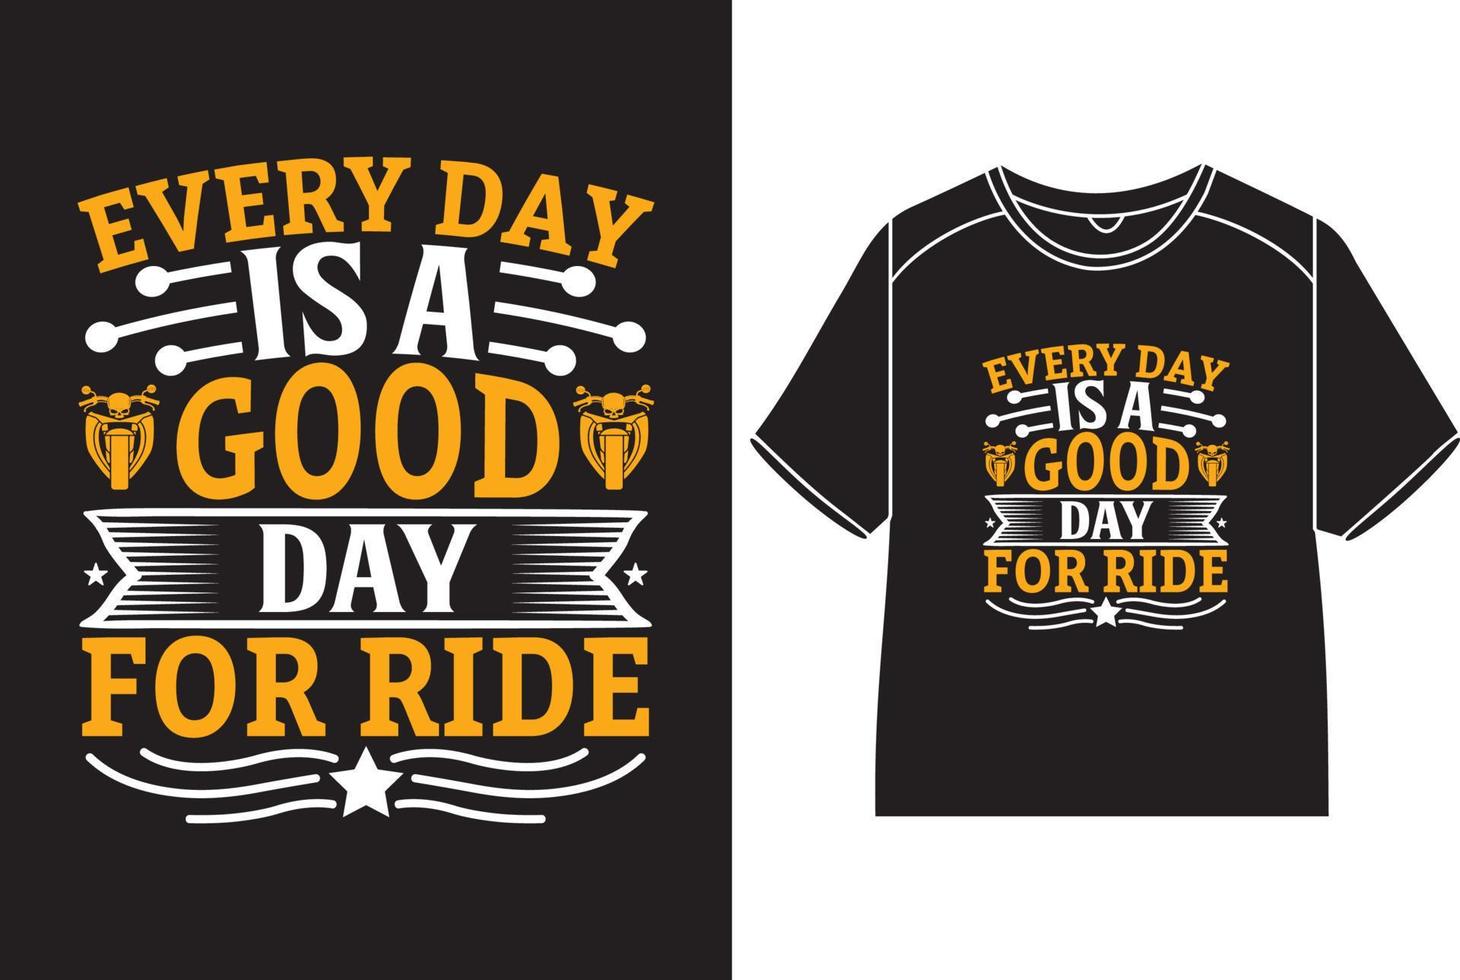 Every day is a good day for ride T-Shirt Design vector